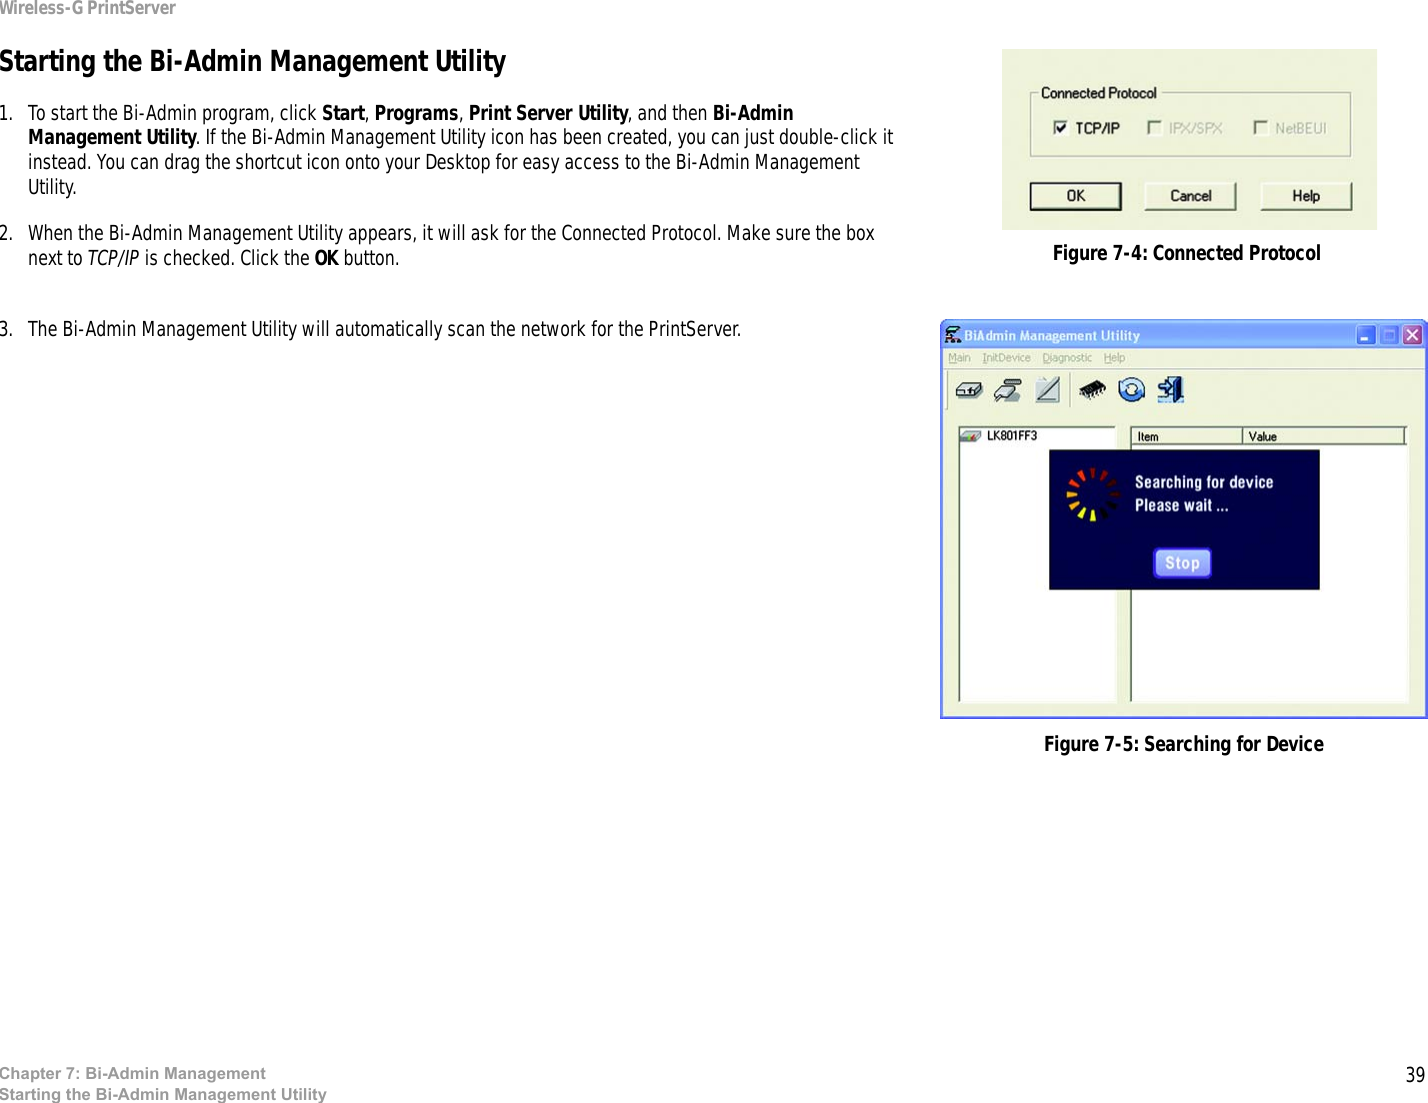 39Wireless-G PrintServerChapter 7: Bi-Admin ManagementStarting the Bi-Admin Management UtilityStarting the Bi-Admin Management Utility1. To start the Bi-Admin program, click Start, Programs, Print Server Utility, and then Bi-Admin Management Utility. If the Bi-Admin Management Utility icon has been created, you can just double-click it instead. You can drag the shortcut icon onto your Desktop for easy access to the Bi-Admin Management Utility.2. When the Bi-Admin Management Utility appears, it will ask for the Connected Protocol. Make sure the box next to TCP/IP is checked. Click the OK button.3. The Bi-Admin Management Utility will automatically scan the network for the PrintServer.Figure 7-5: Searching for DeviceFigure 7-4: Connected Protocol